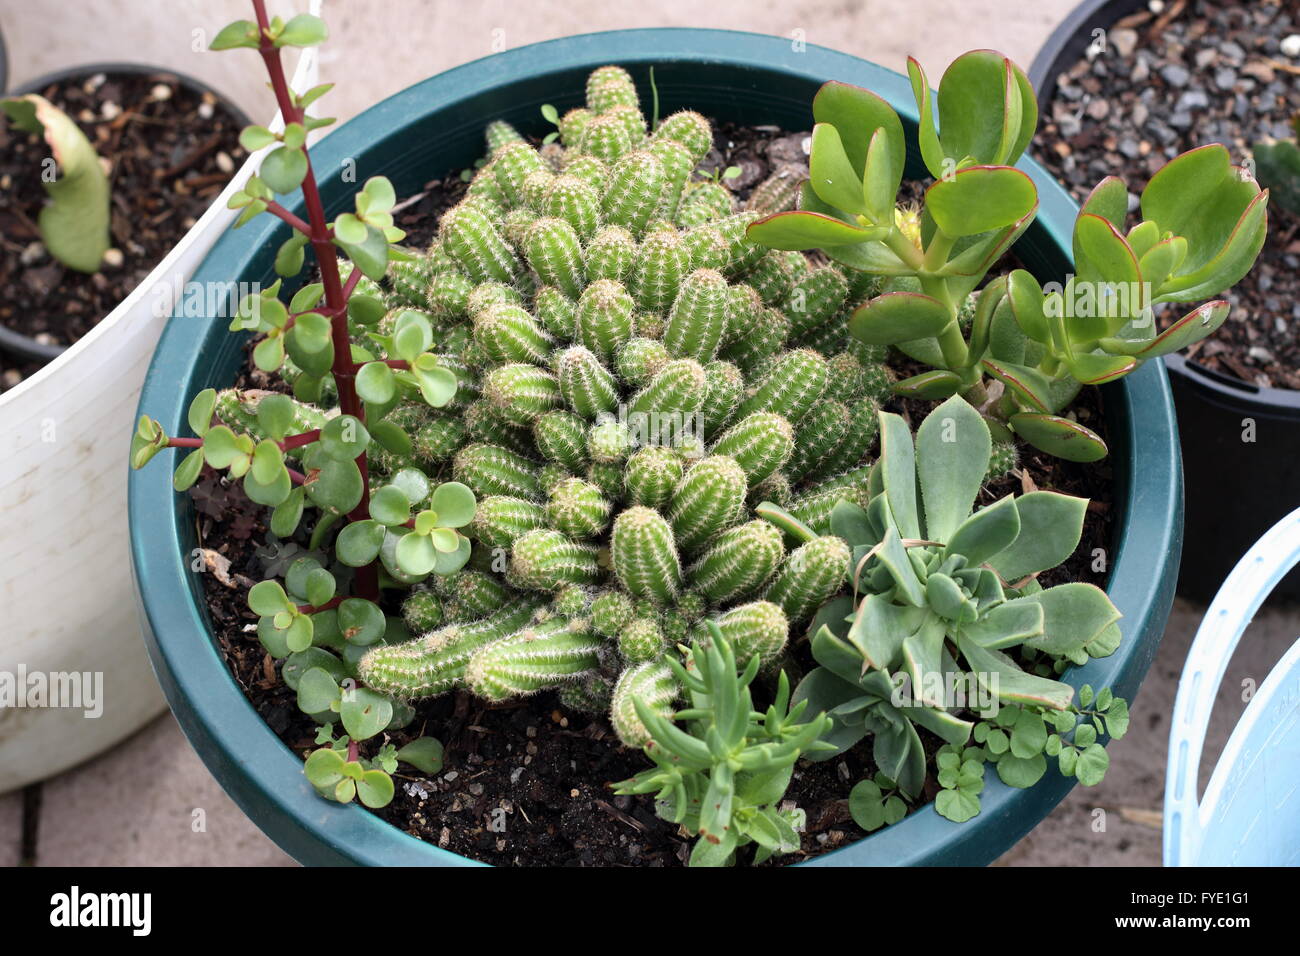 Varieties of cactus and succulents in a pot - Echinopsis chamaecereus, Jade plant, money plant and Echeveria Stock Photo